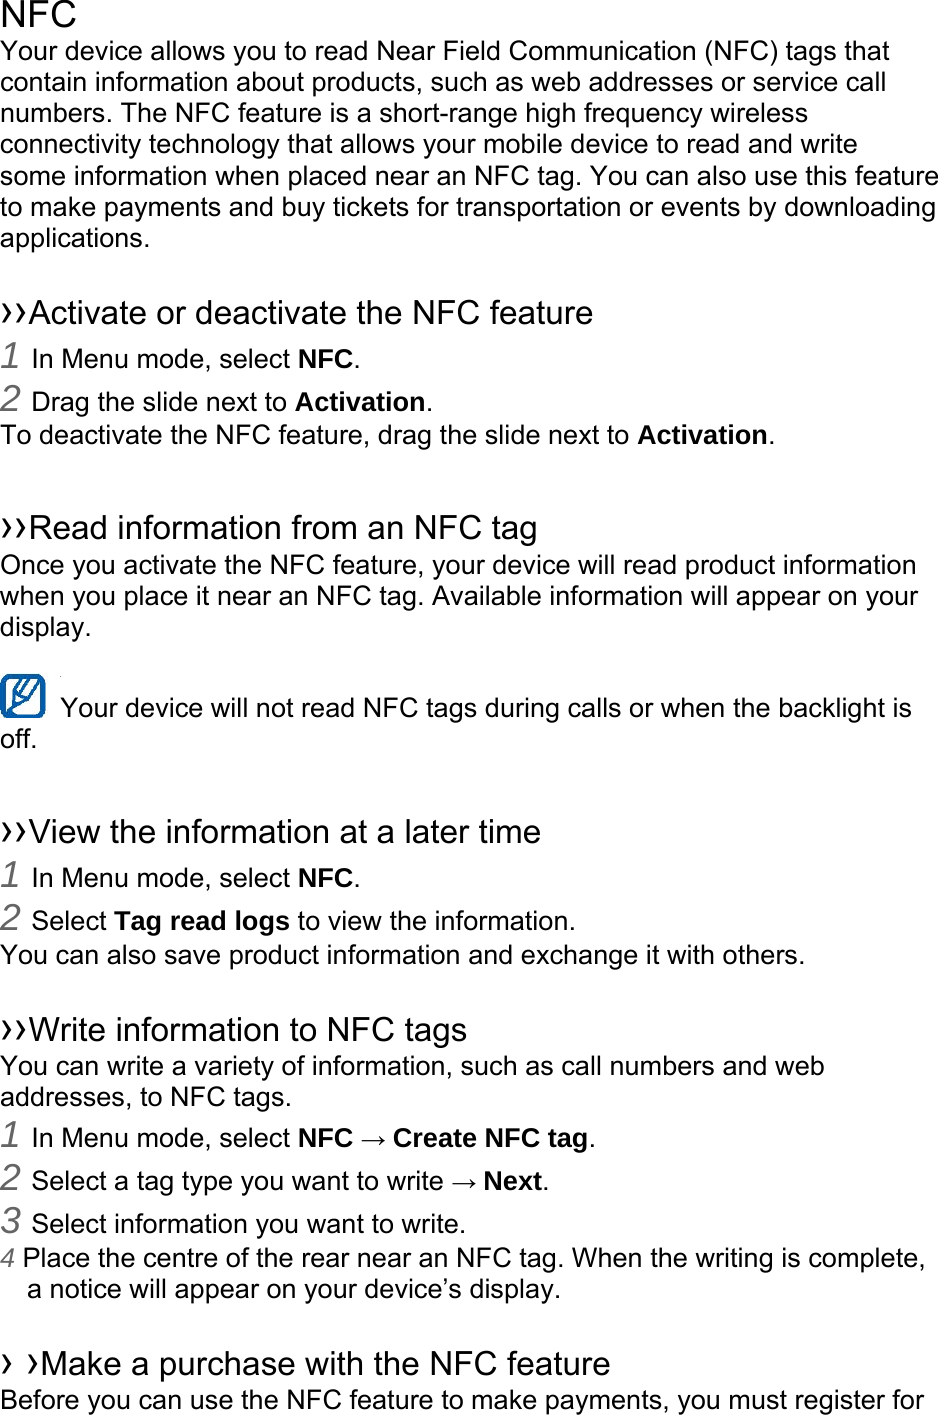 NFC Your device allows you to read Near Field Communication (NFC) tags that contain information about products, such as web addresses or service call numbers. The NFC feature is a short-range high frequency wireless connectivity technology that allows your mobile device to read and write some information when placed near an NFC tag. You can also use this feature to make payments and buy tickets for transportation or events by downloading applications.   ››Activate or deactivate the NFC feature 1 In Menu mode, select NFC. 2 Drag the slide next to Activation. To deactivate the NFC feature, drag the slide next to Activation.  ››Read information from an NFC tag Once you activate the NFC feature, your device will read product information when you place it near an NFC tag. Available information will appear on your display.  Your device will not read NFC tags during calls or when the backlight is   off.  ››View the information at a later time 1 In Menu mode, select NFC. 2 Select Tag read logs to view the information. You can also save product information and exchange it with others.  ››Write information to NFC tags   You can write a variety of information, such as call numbers and web addresses, to NFC tags. 1 In Menu mode, select NFC → Create NFC tag. 2 Select a tag type you want to write → Next. 3 Select information you want to write. 4 Place the centre of the rear near an NFC tag. When the writing is complete, a notice will appear on your device’s display.  › ›Make a purchase with the NFC feature   Before you can use the NFC feature to make payments, you must register for 